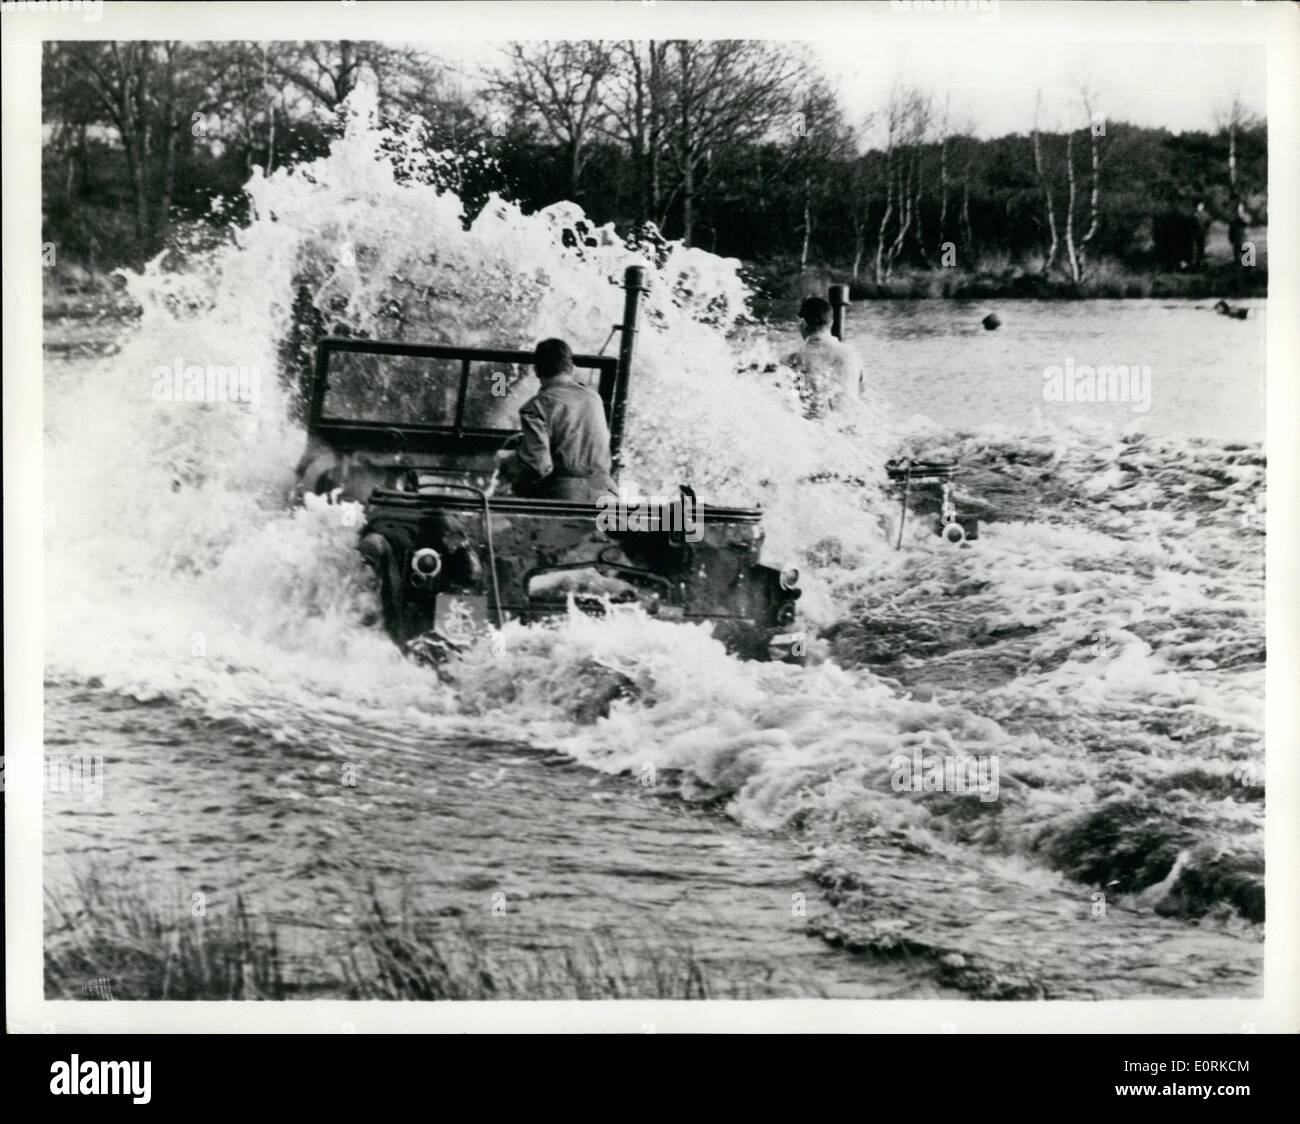 Dec. 12, 1959 - Military, mechanical ''Grand national'' in waves and awake two waterproofed ''Champ'' vehicles speed across a five -feet deep pond. They were competing in the British army mechanical transport championship at Bordon, Hampshire, England. The contest, over a tough cross - country course, is Britain's mechanical and military ''Grand National' Stock Photo